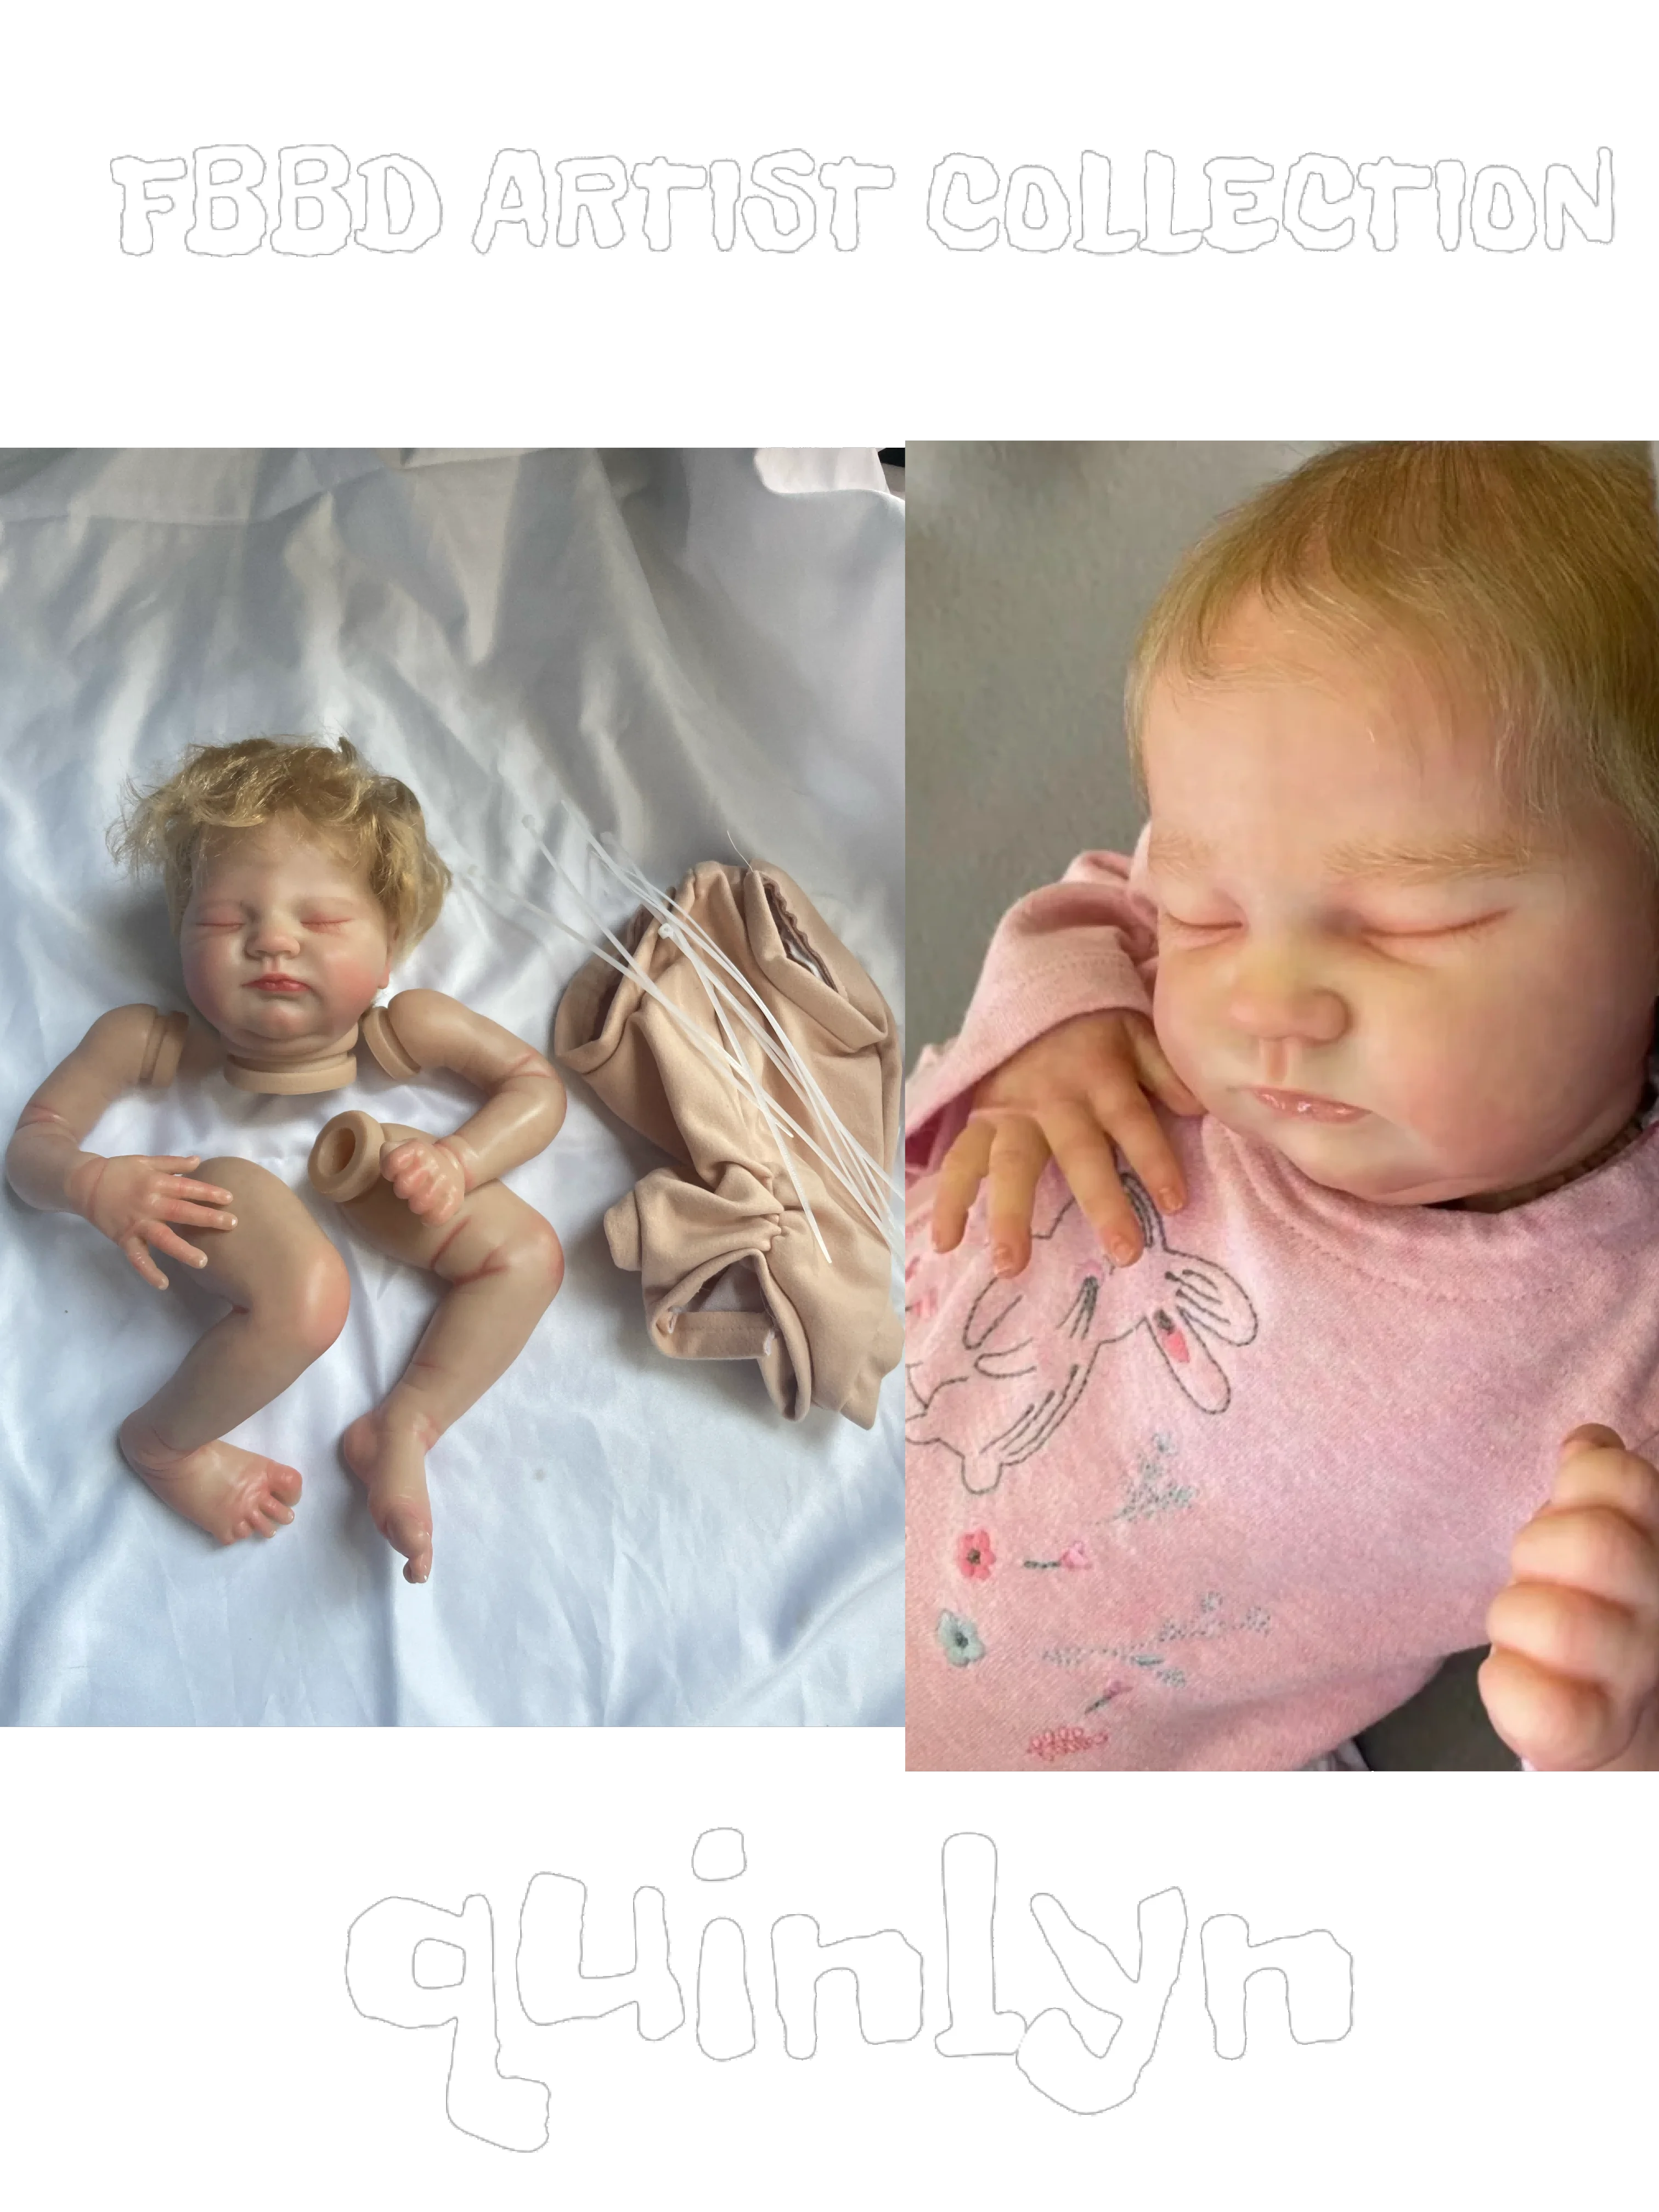 Quinlyn 20inch Bebe Reborn Painted Kit By FBBD Artist Unassembled Kit With Veins Lifelike With Hand-Rooted Hair Dolls For Girl teegan 28‘’with hand rooted hair bebe reborn doll by fbbd high quality artist doll unassembled kit dolls for children